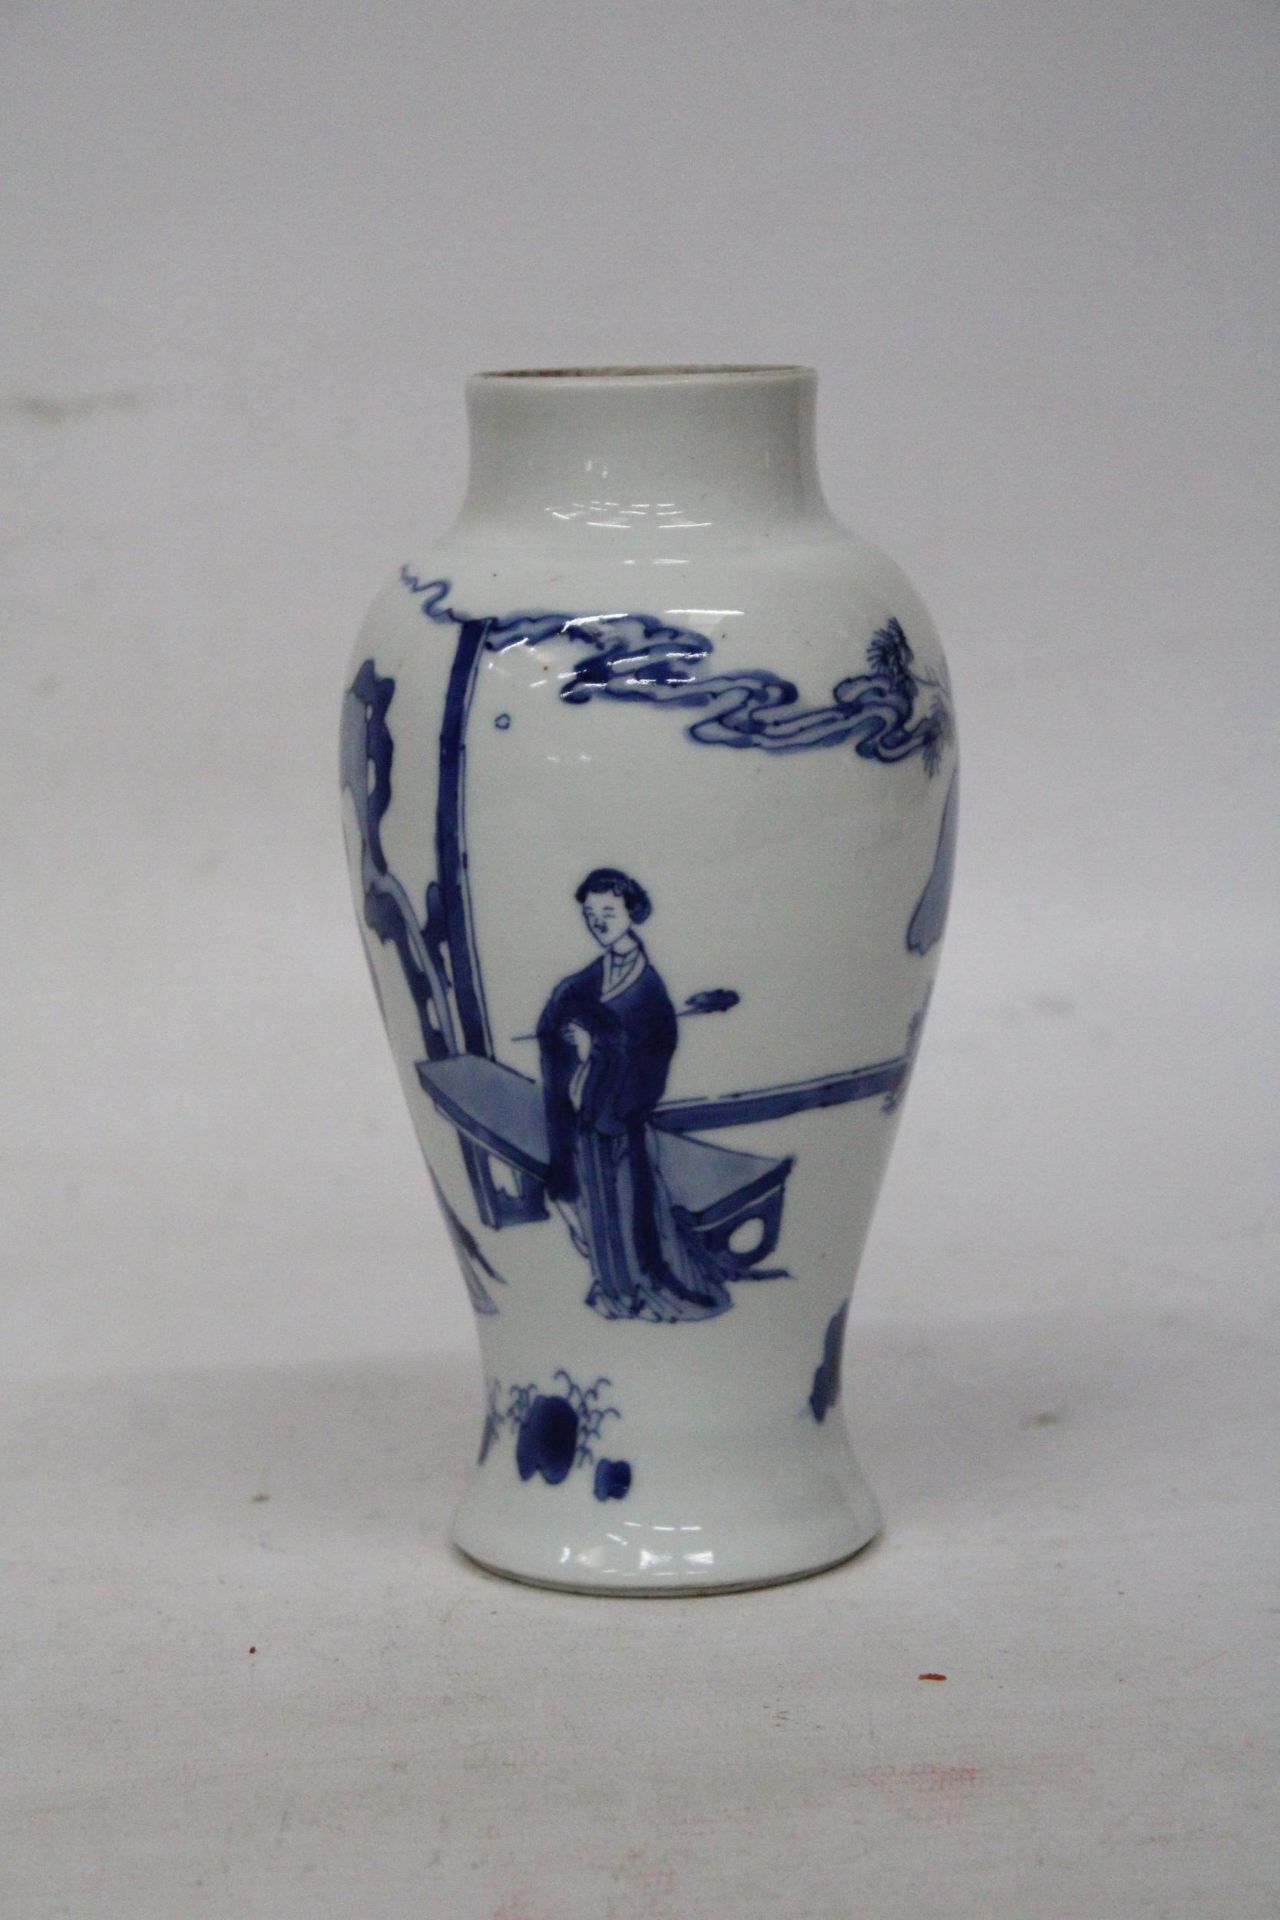 A CHINESE KANGXI PERIOD (1661 - 1722) BLUE AND WHITE PORCELAIN VASE HEIGHT 19CM - Image 3 of 7